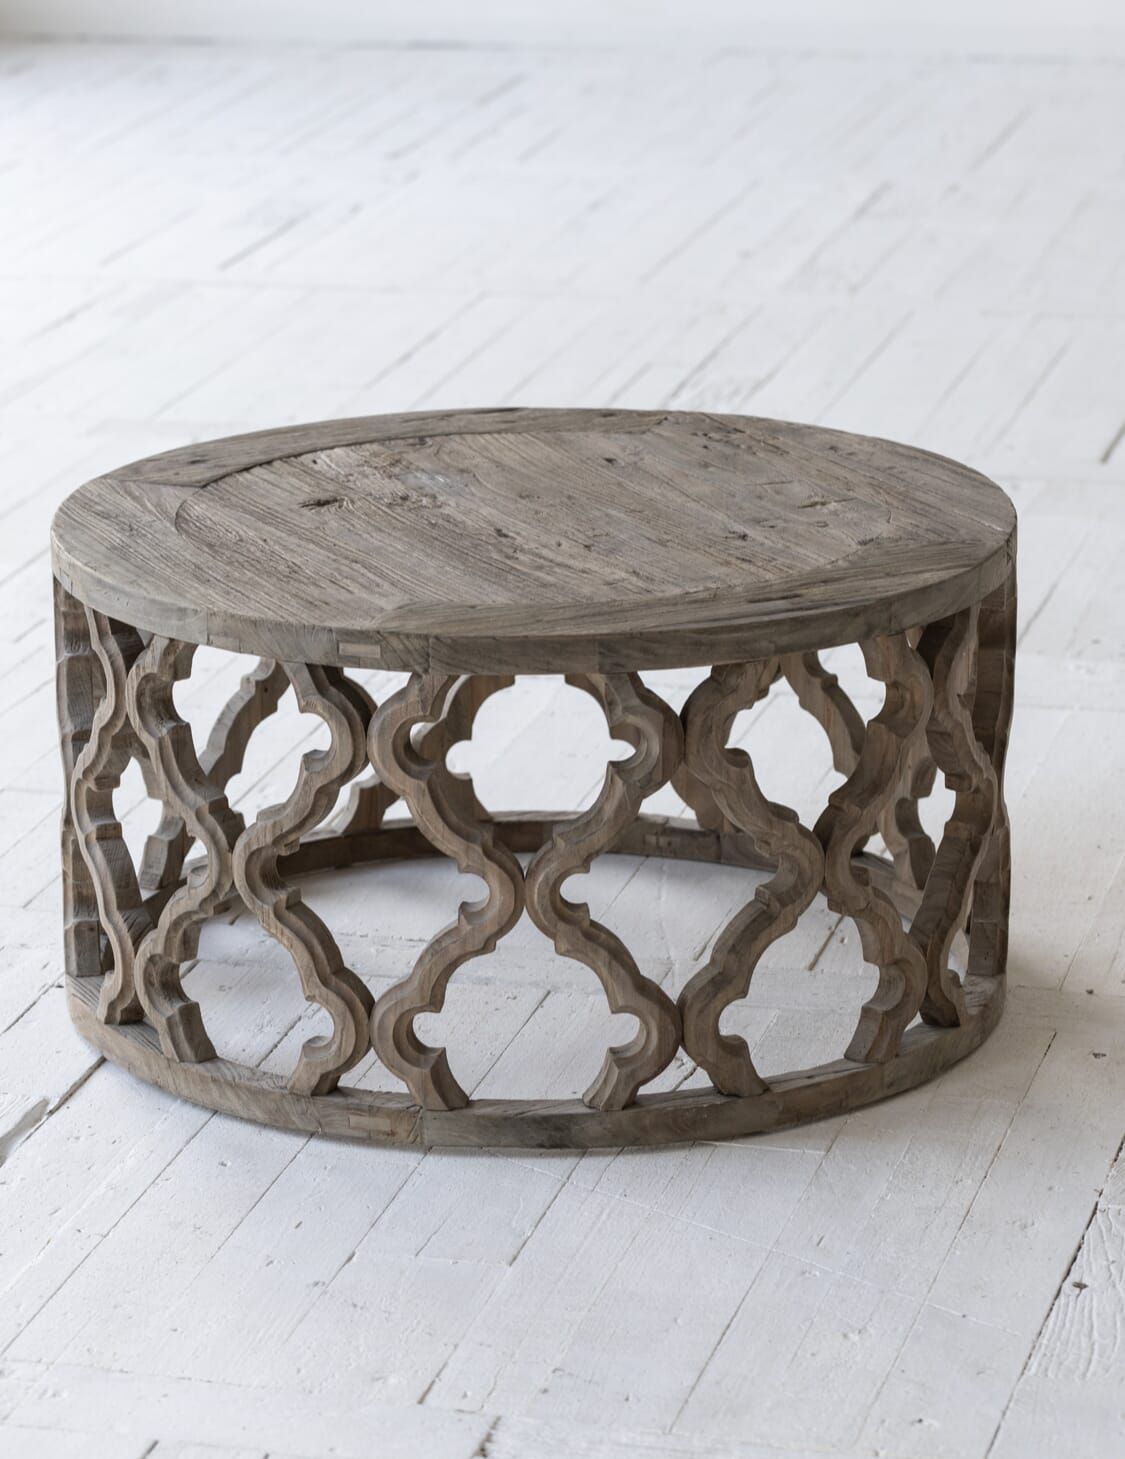 Solid Elm Coffee Table | Pretty Little Home Inside Reclaimed Elm Wood Coffee Tables (View 20 of 20)